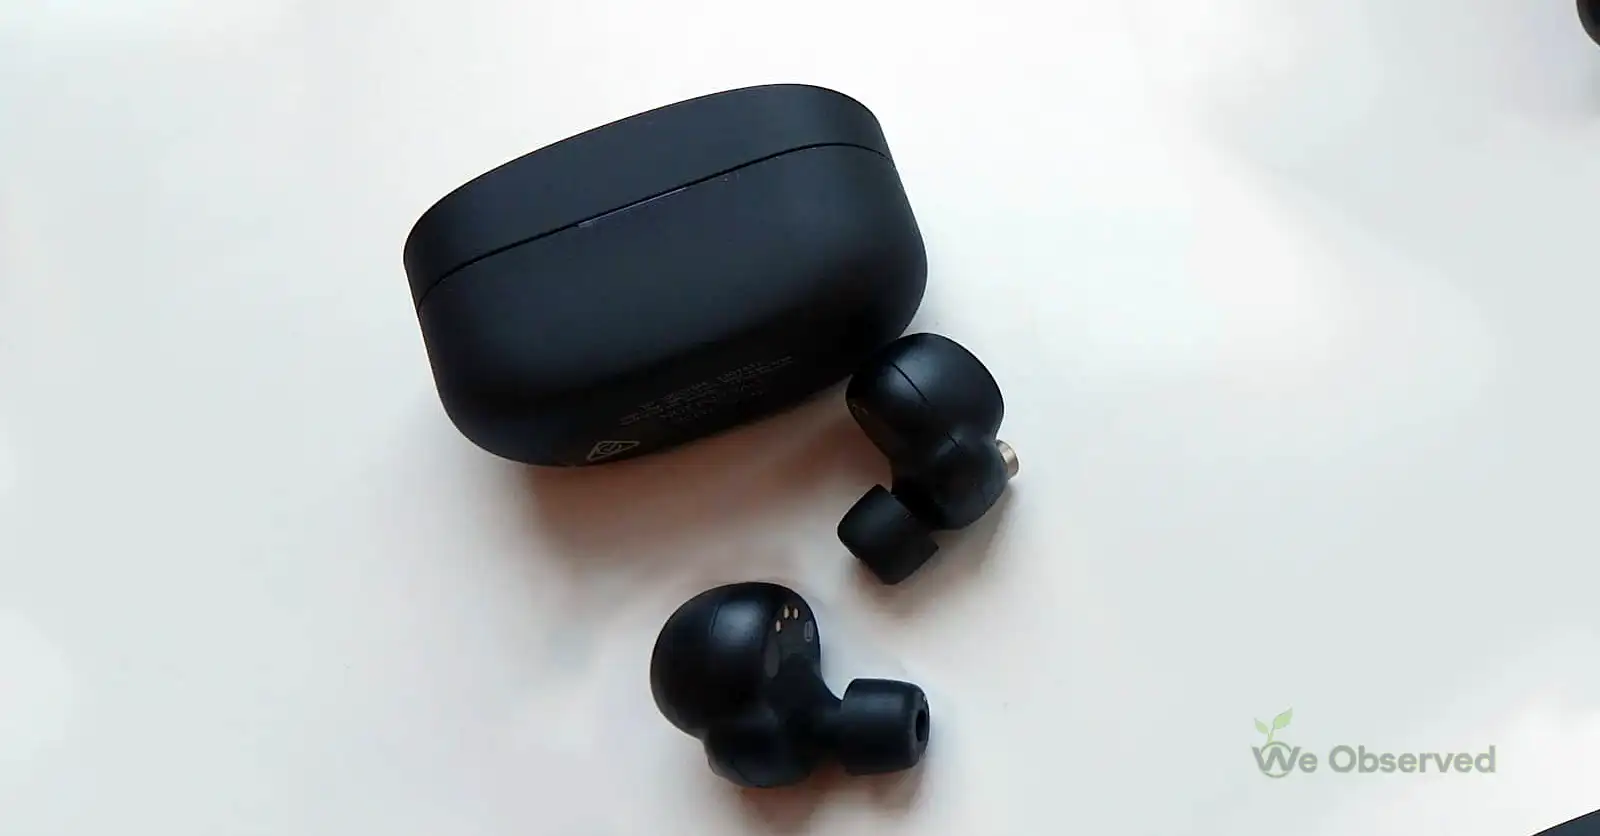 Review of Sony WF-1000XM4 earbuds